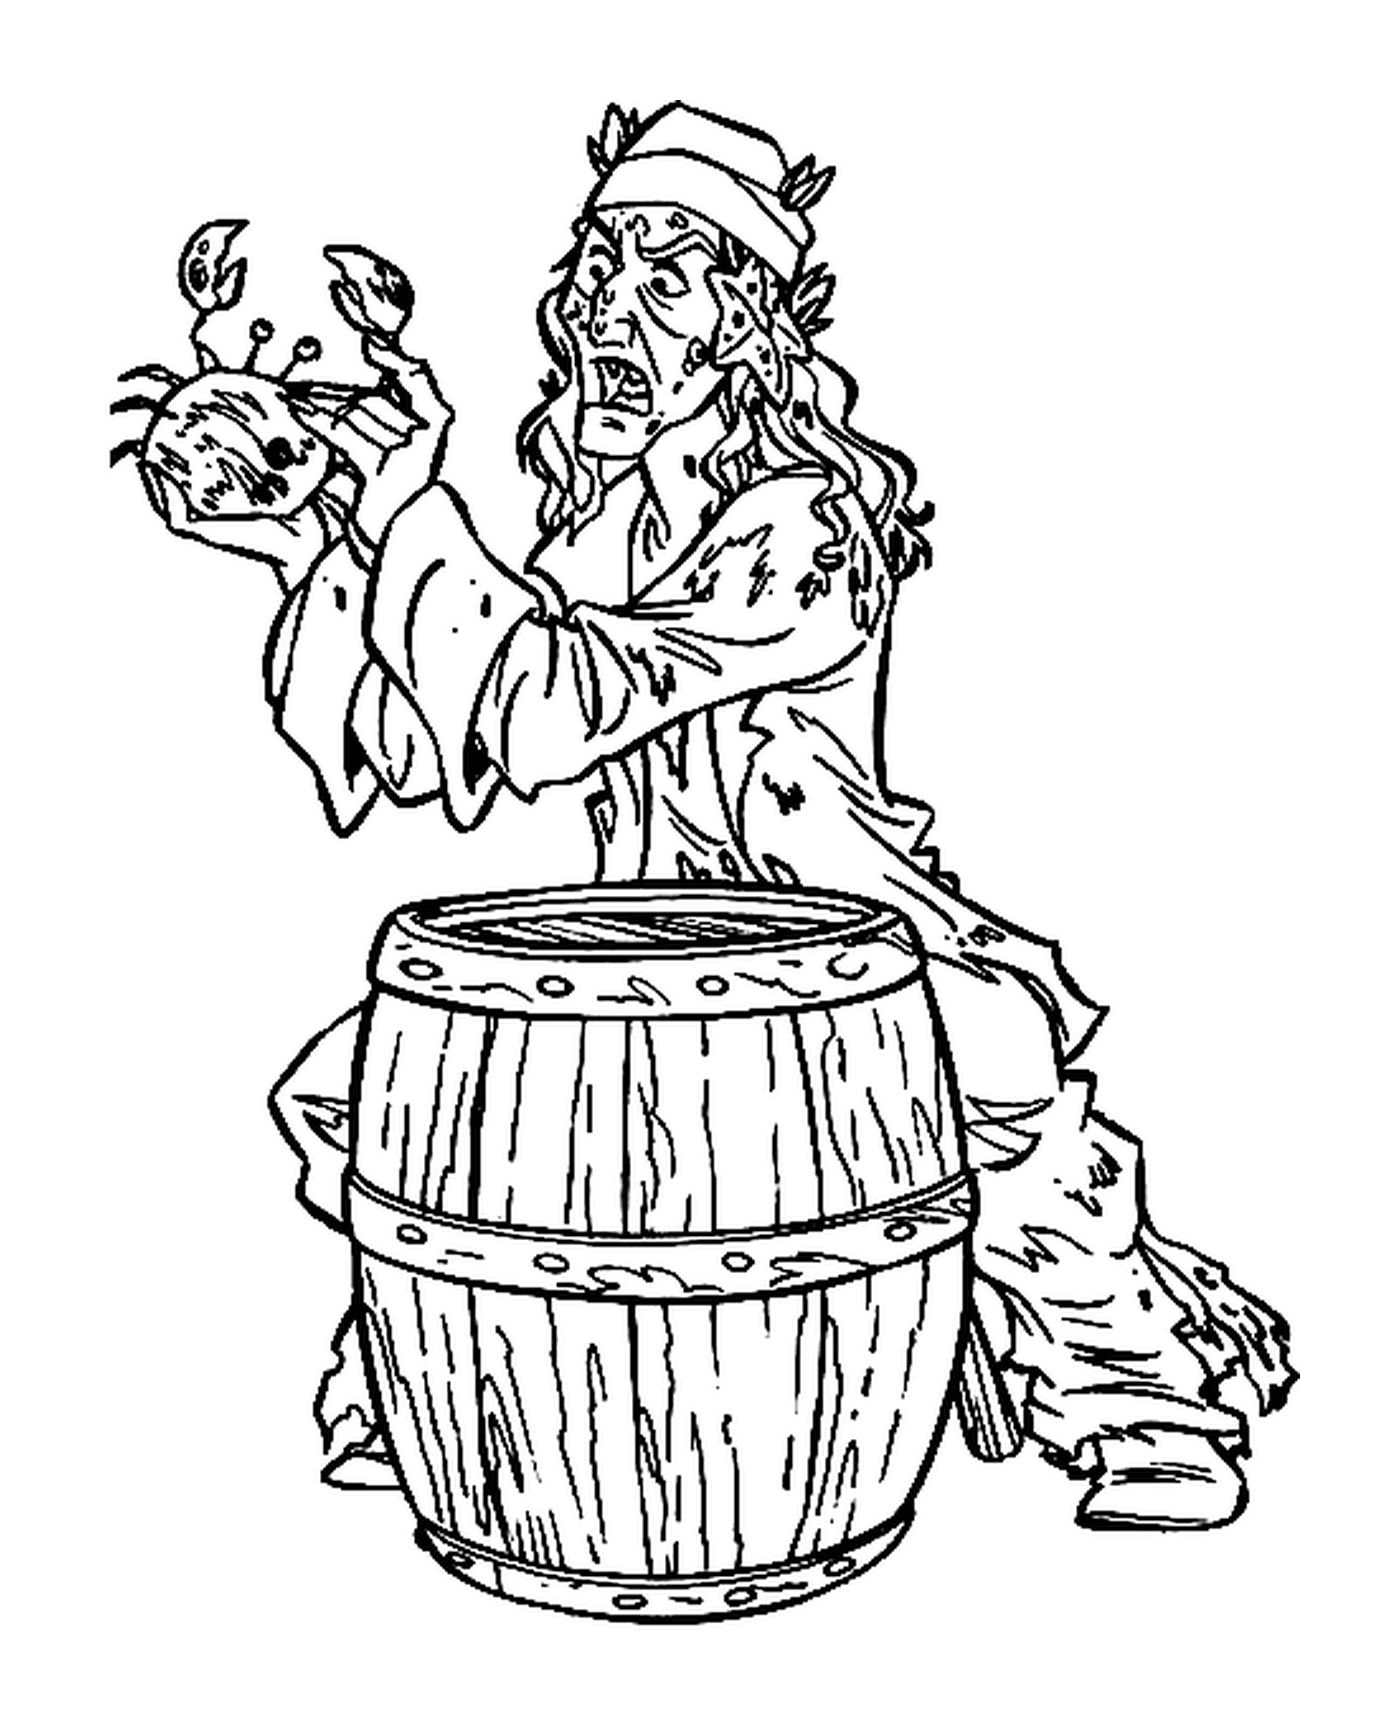  A cursed pirate holding a crab behind a barrel 